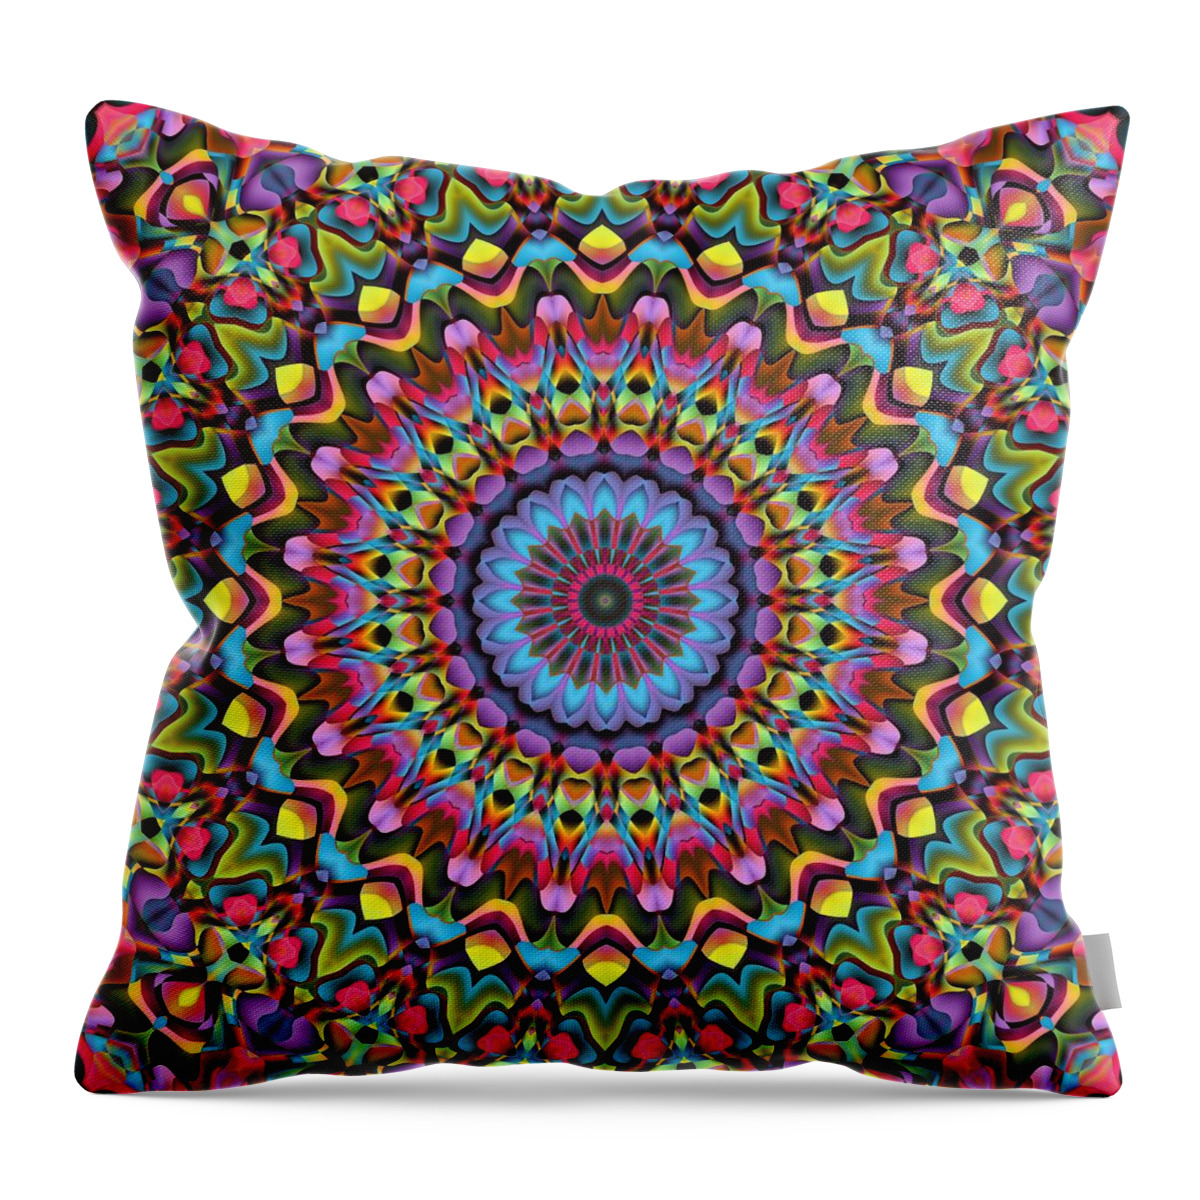 Psychedelic Throw Pillow featuring the digital art The Psychedelic Days by Lyle Hatch